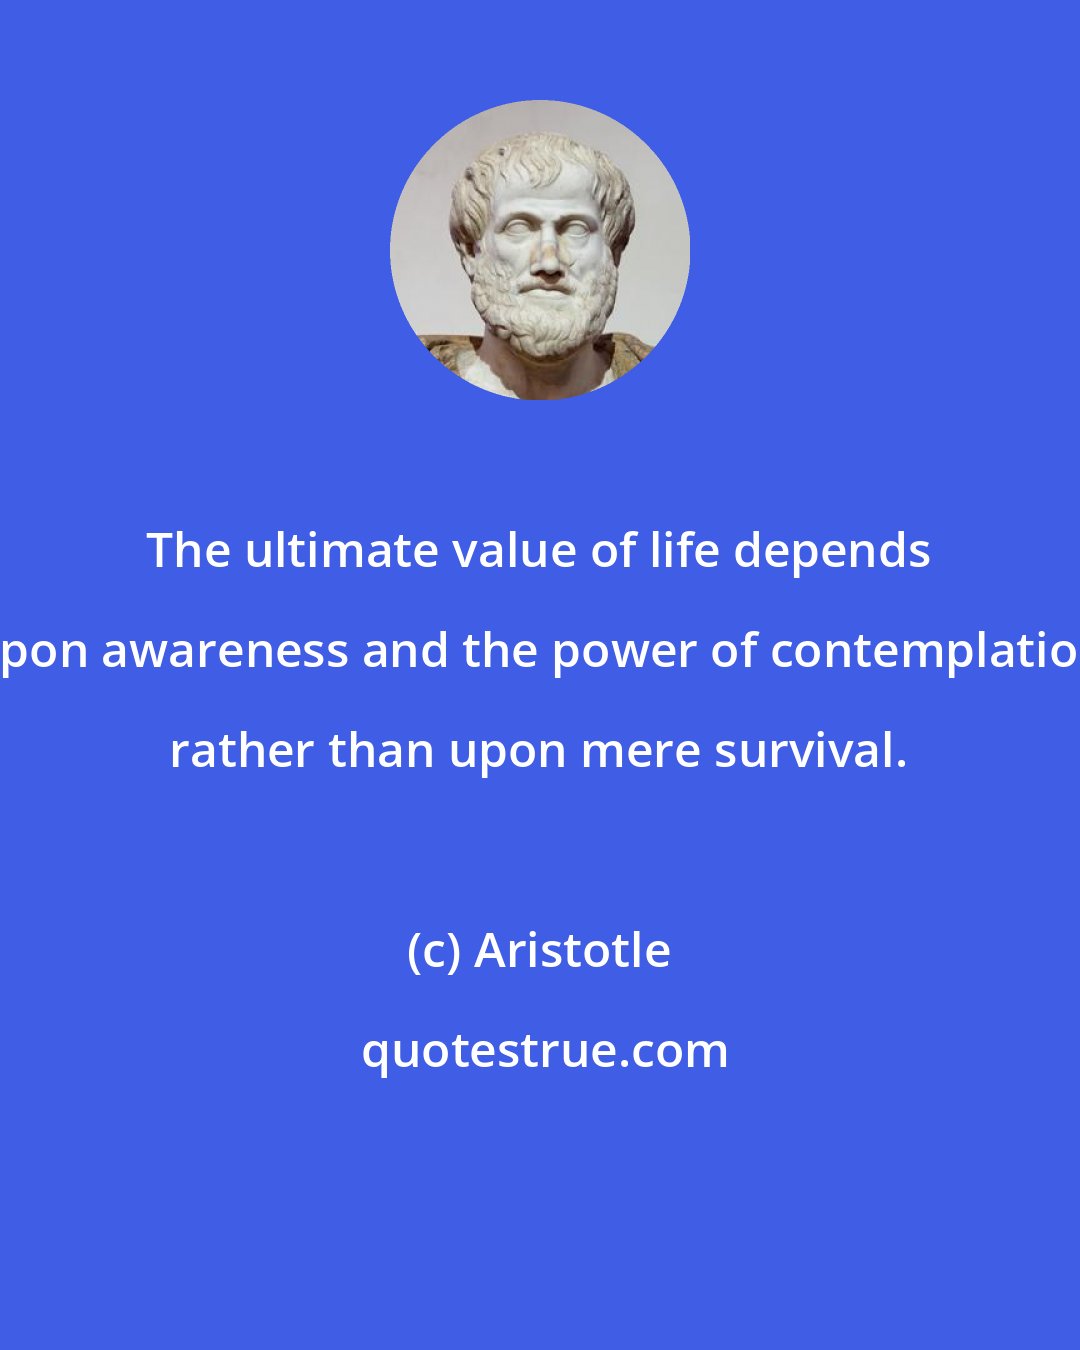 Aristotle: The ultimate value of life depends upon awareness and the power of contemplation rather than upon mere survival.